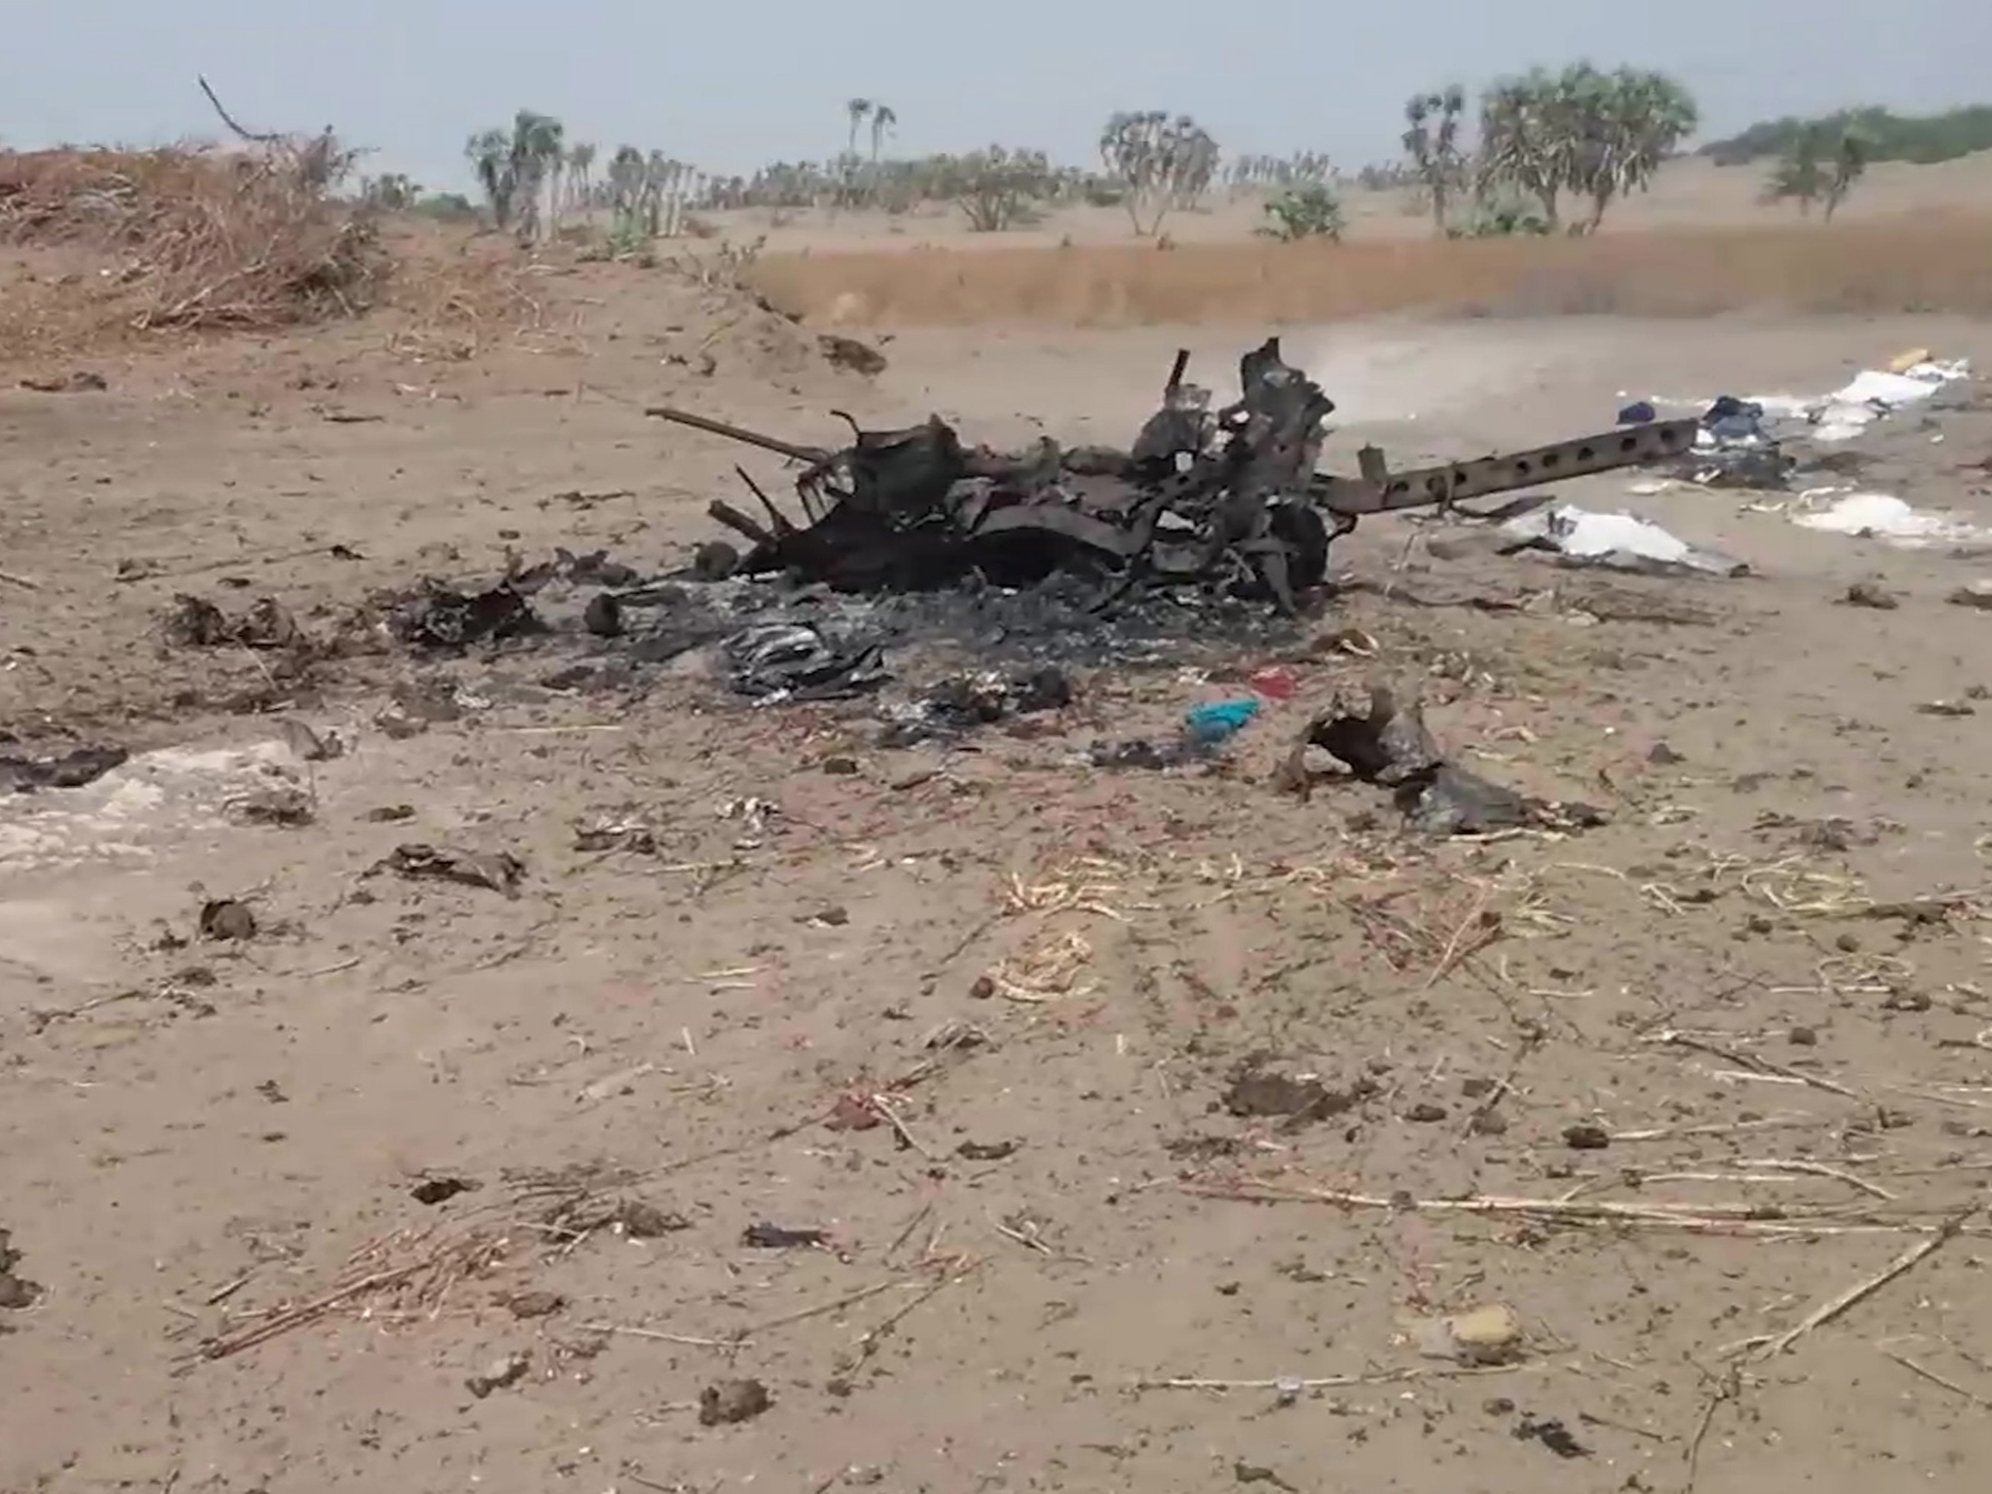 The wreck of a vehicle at the scene of an airstrike which allegedly hit a car carrying displaced people, killing women and children fleeing fighting in Al Durayhimi district